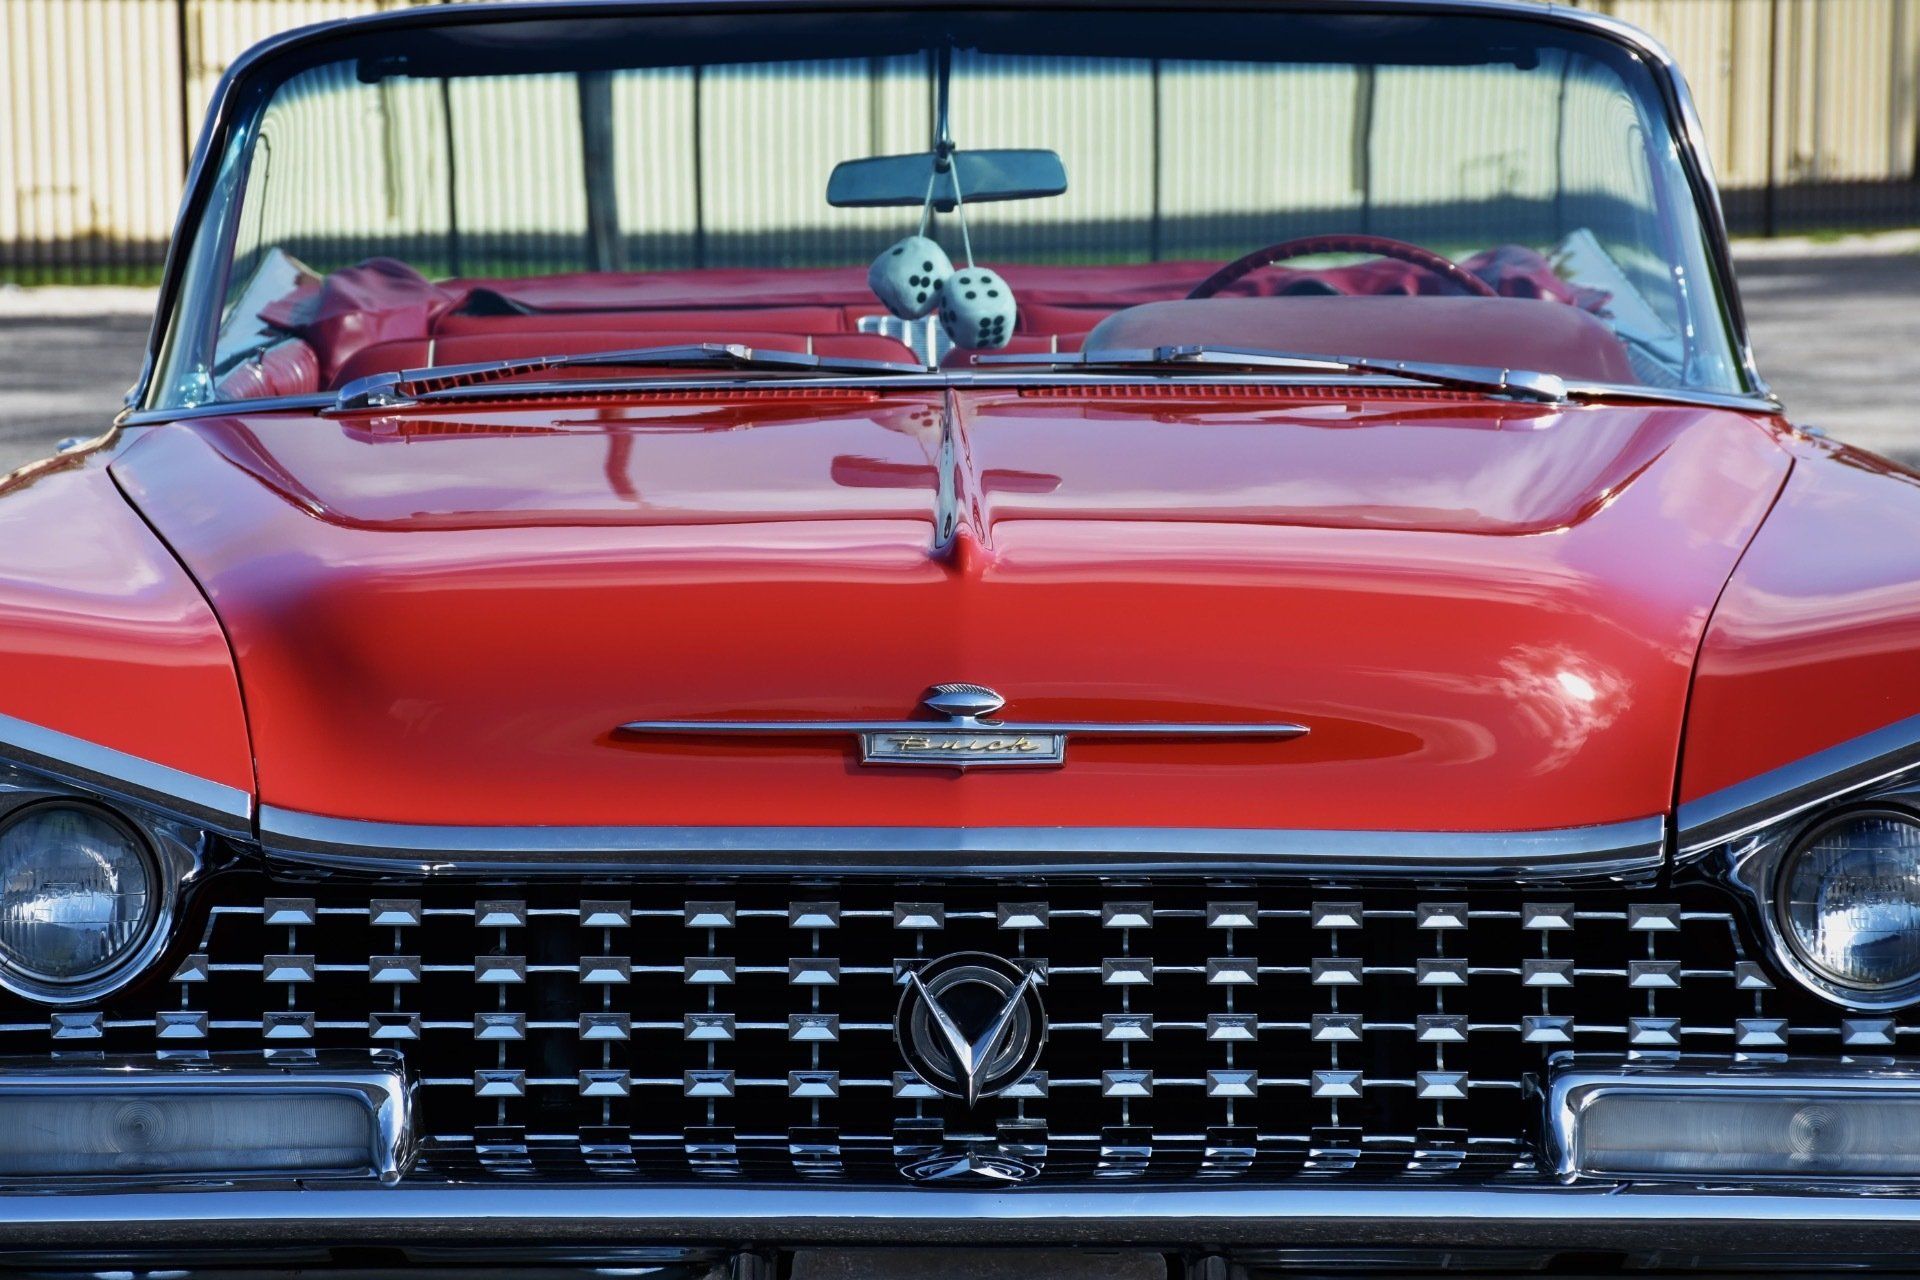 1959 Buick Electra 225 front view